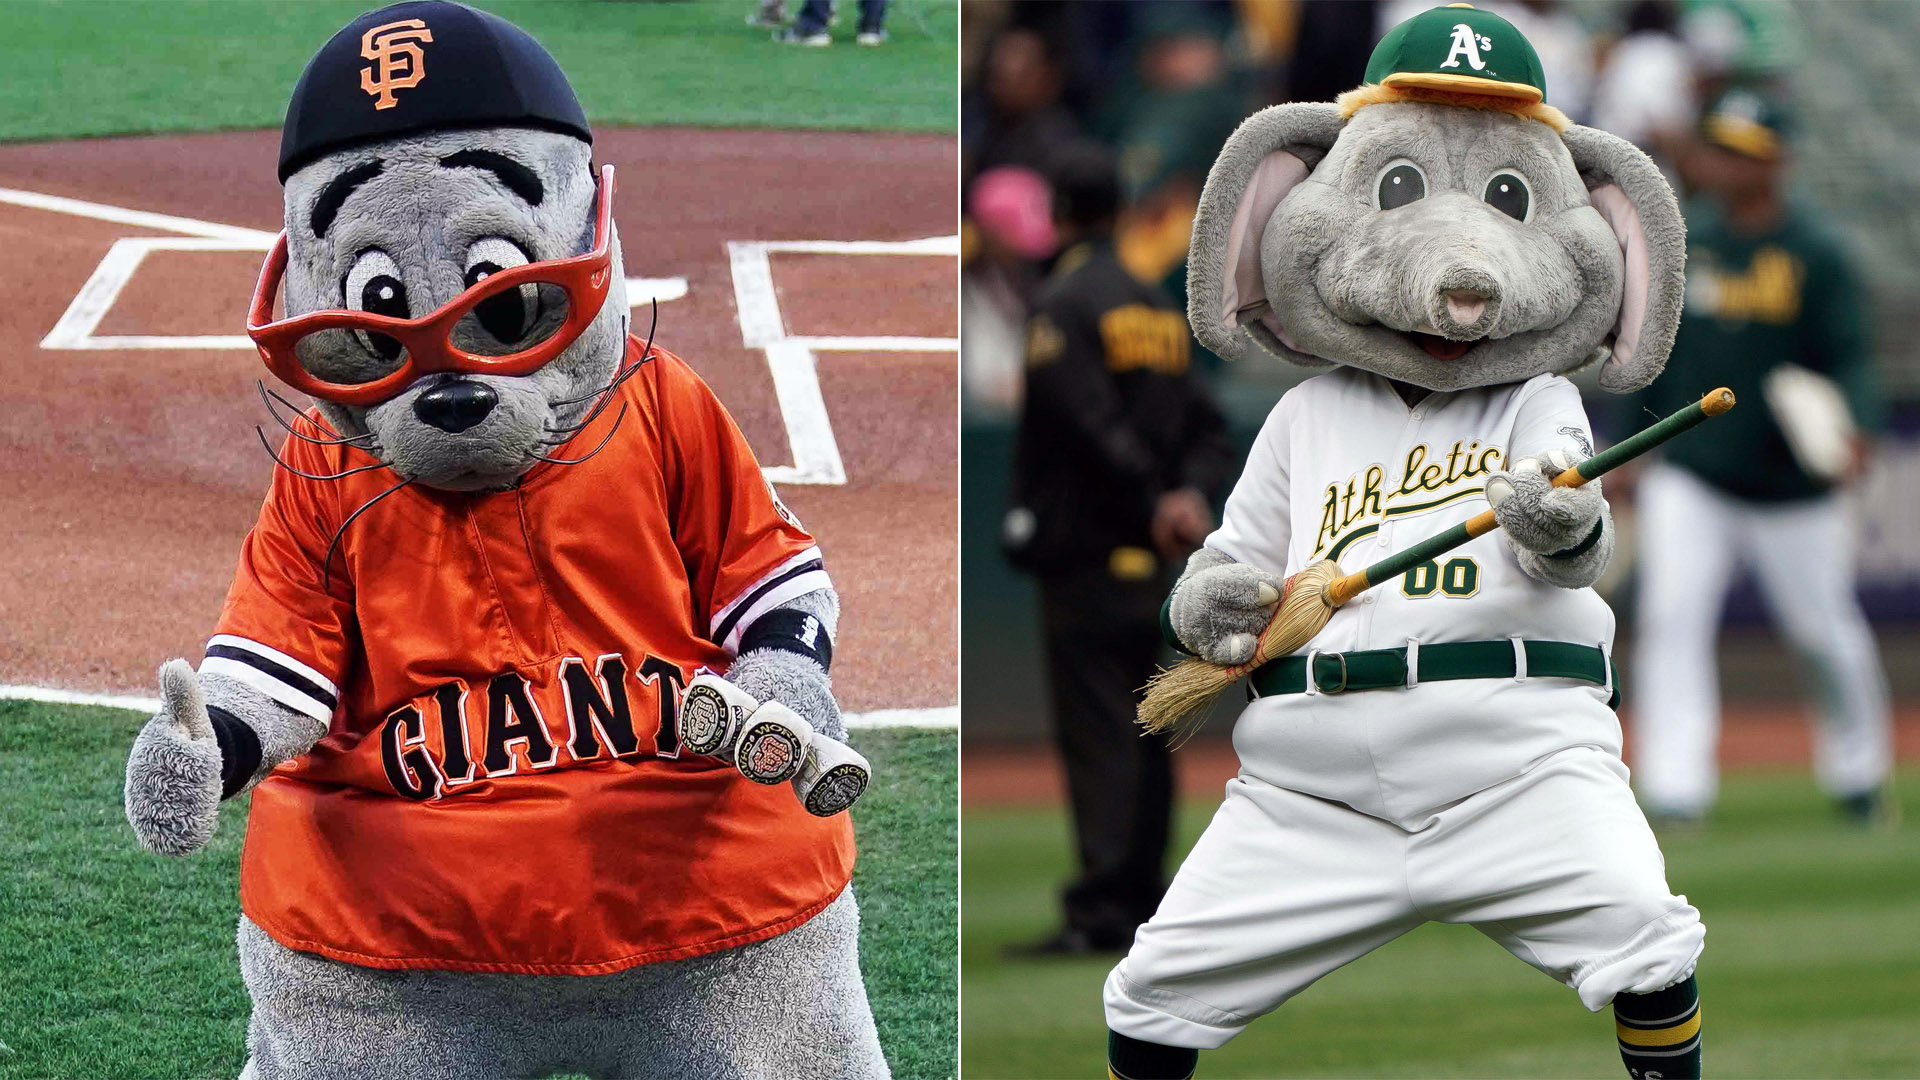 Giants Mascot Lou Seal, A's Mascot Stomper Have Heated Twitter Battle – NBC  Bay Area